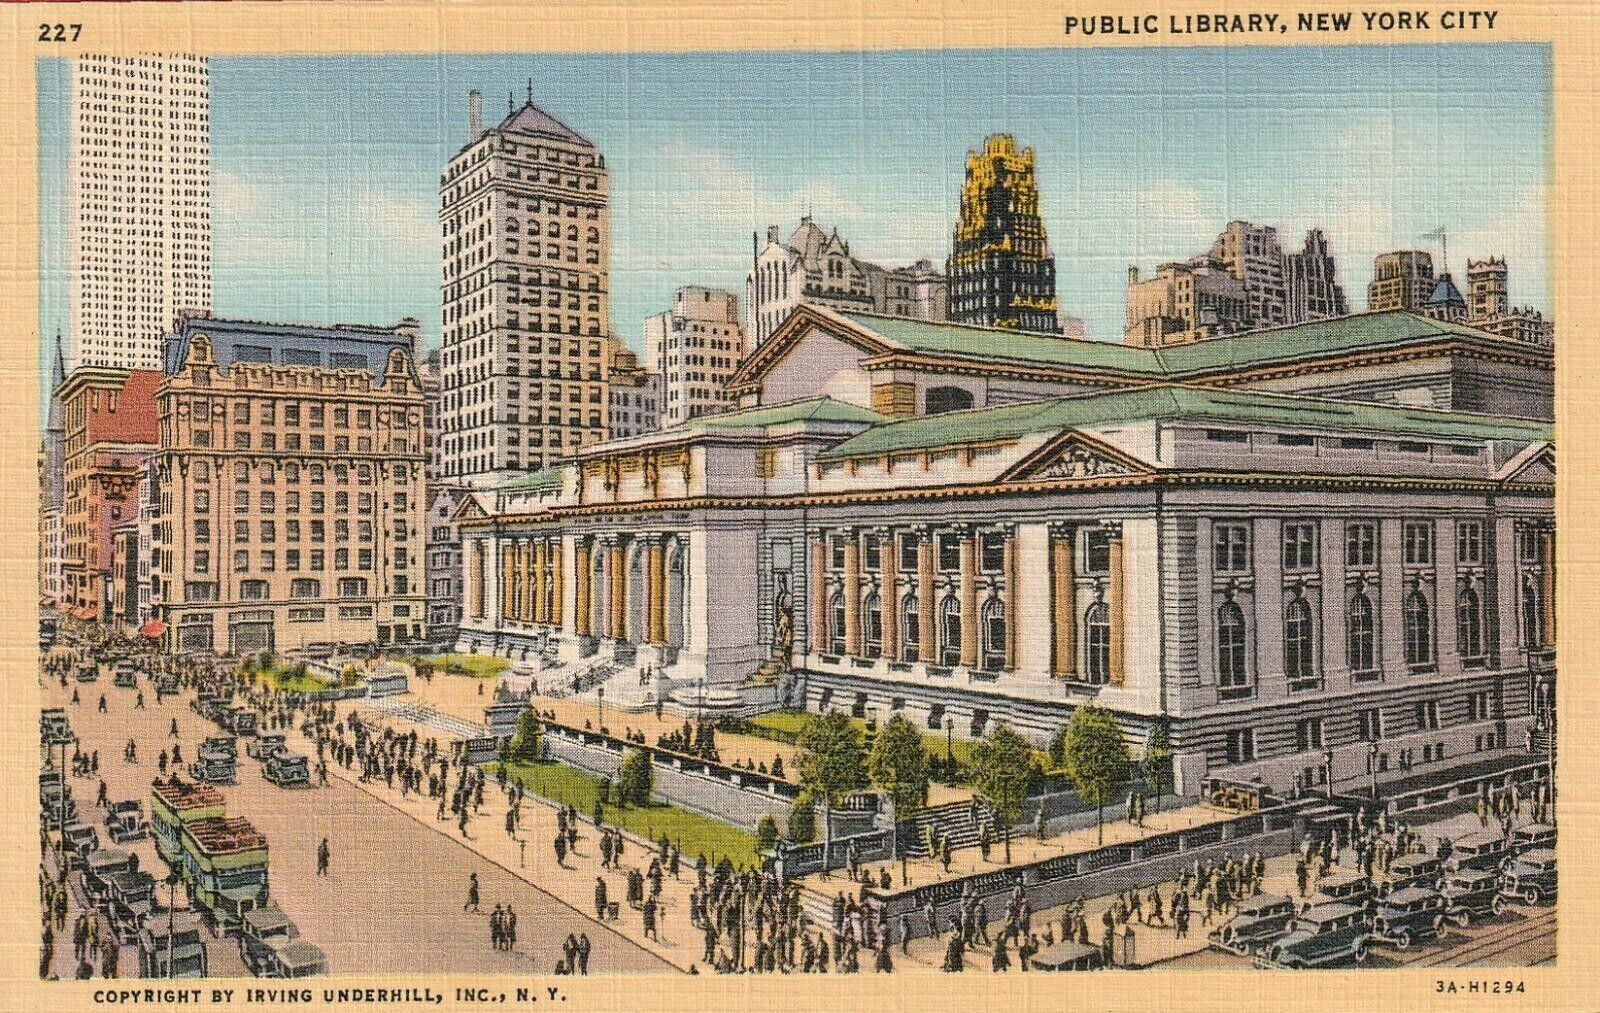 Public Library New York City Linen Postcard by Irving Underhill